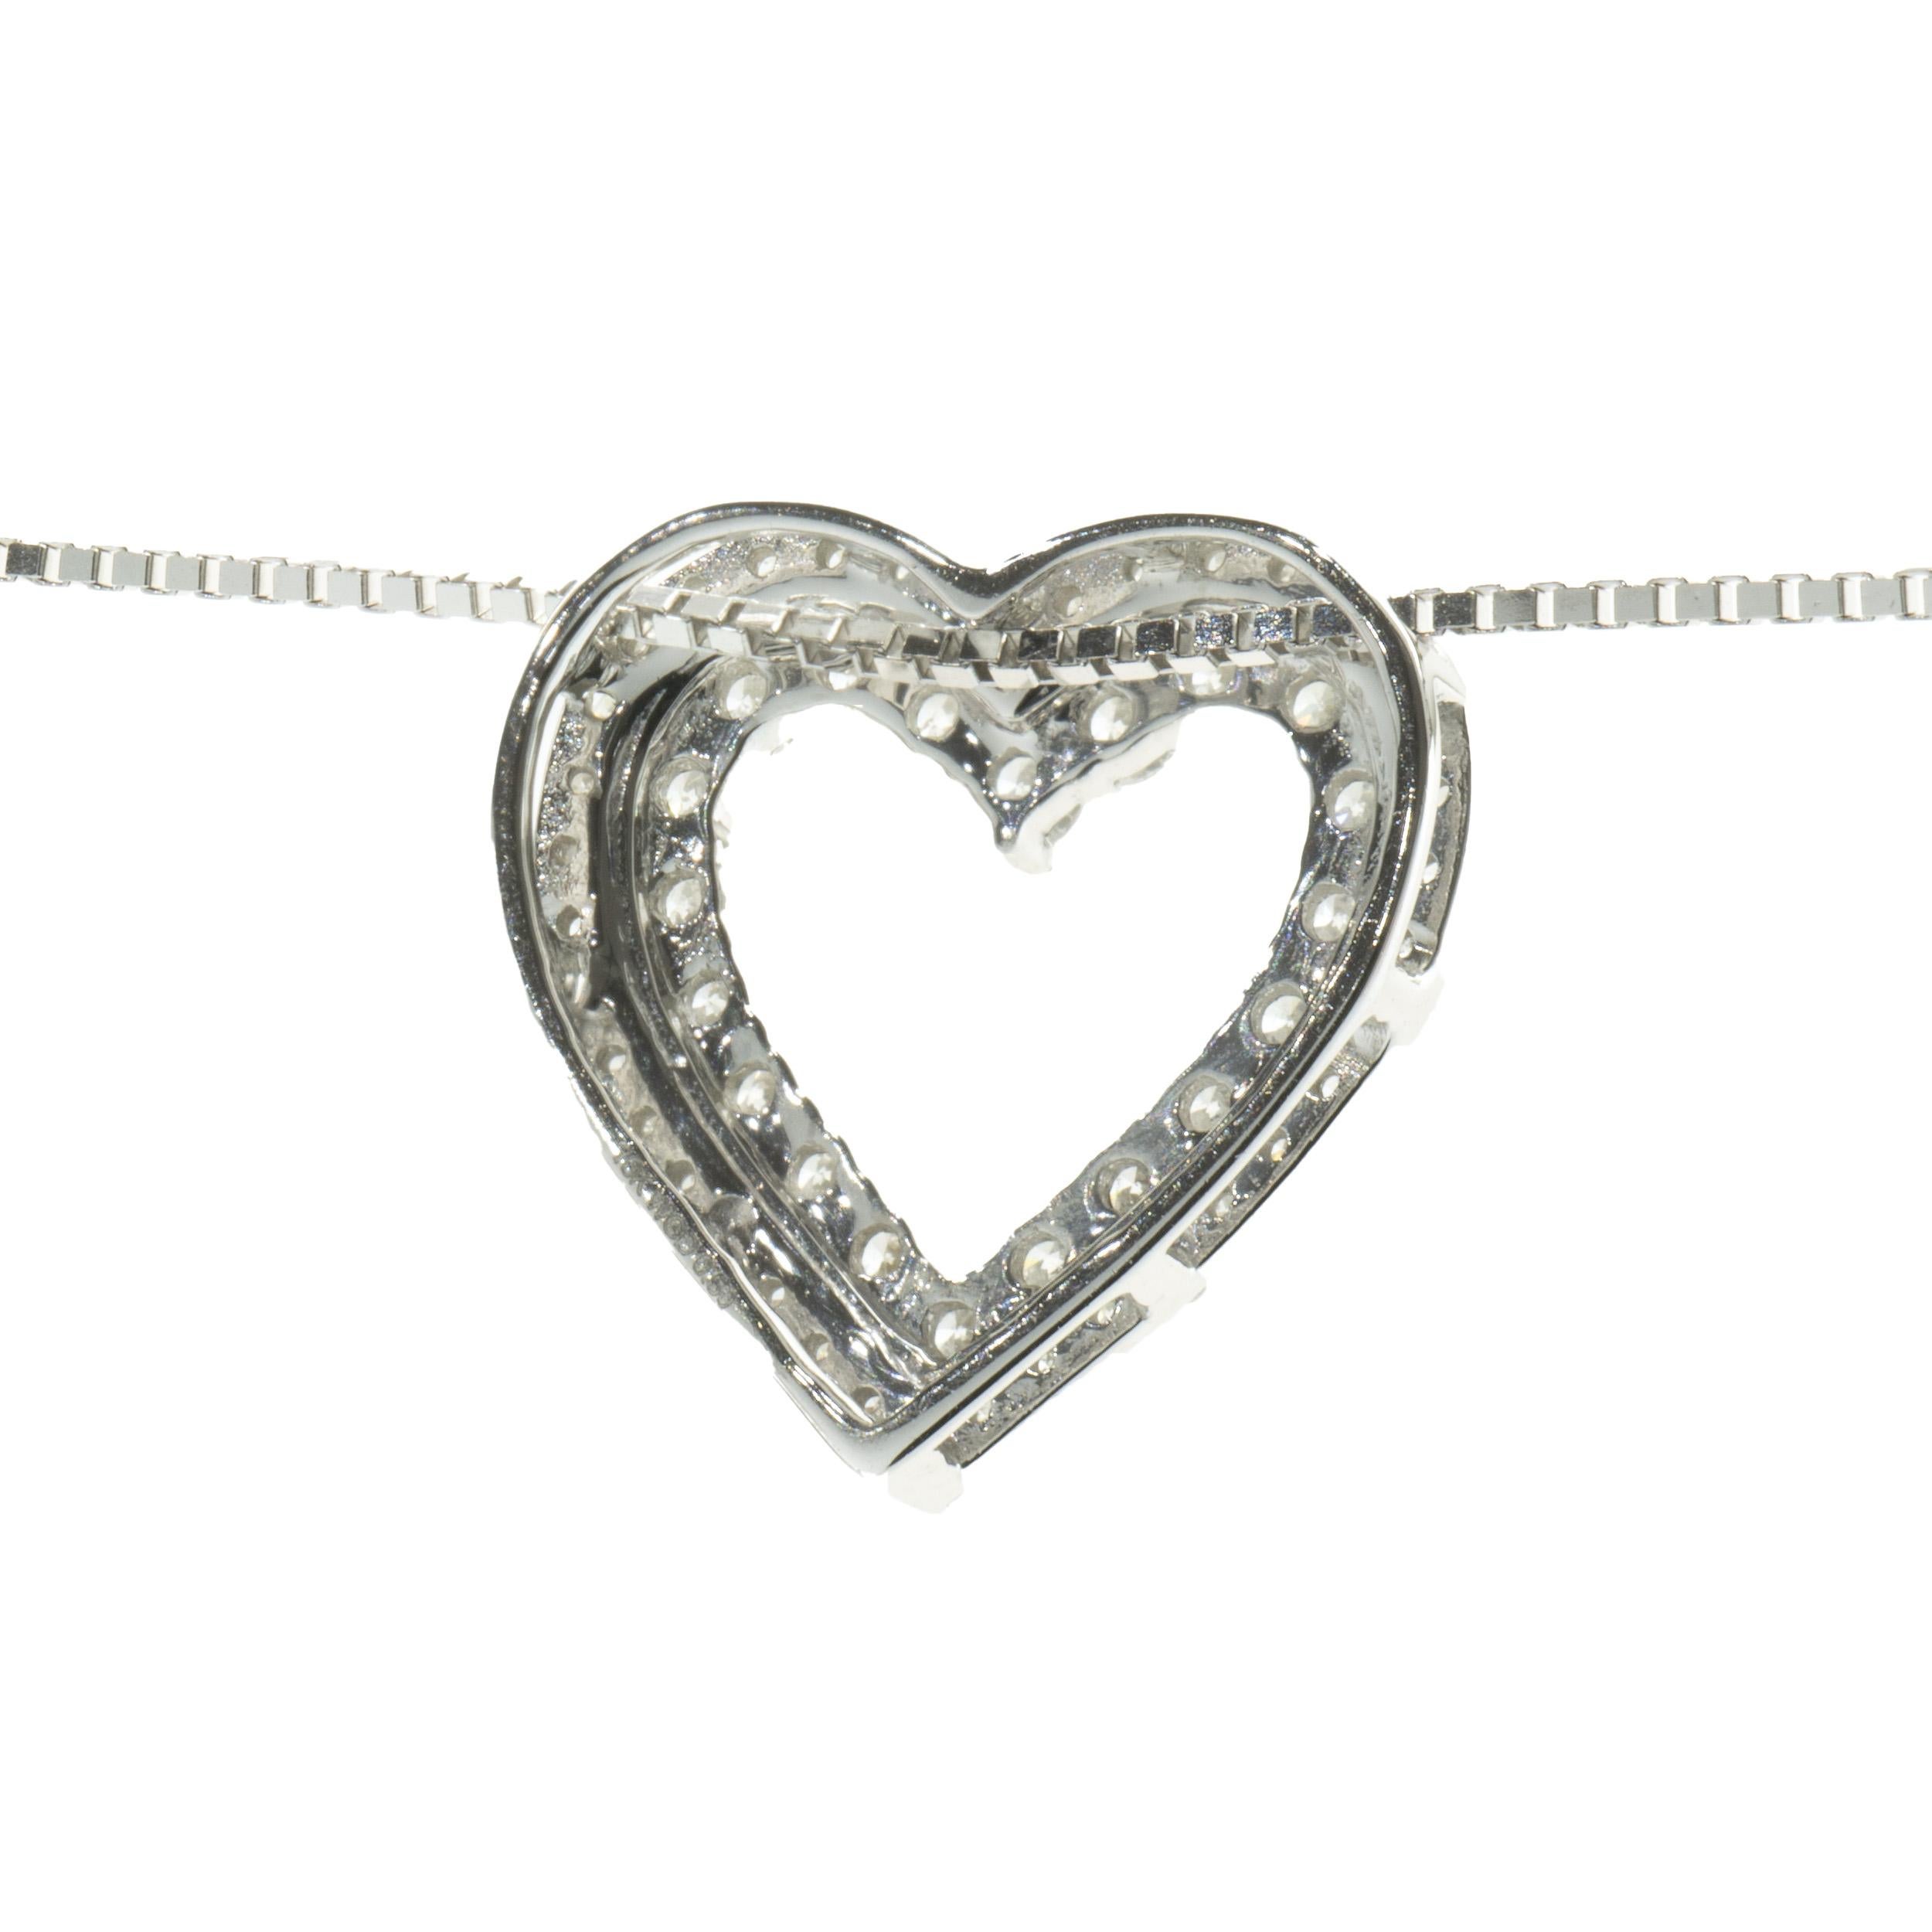 10 Karat White Gold Pave Diamond Open Heart Necklace In Excellent Condition For Sale In Scottsdale, AZ